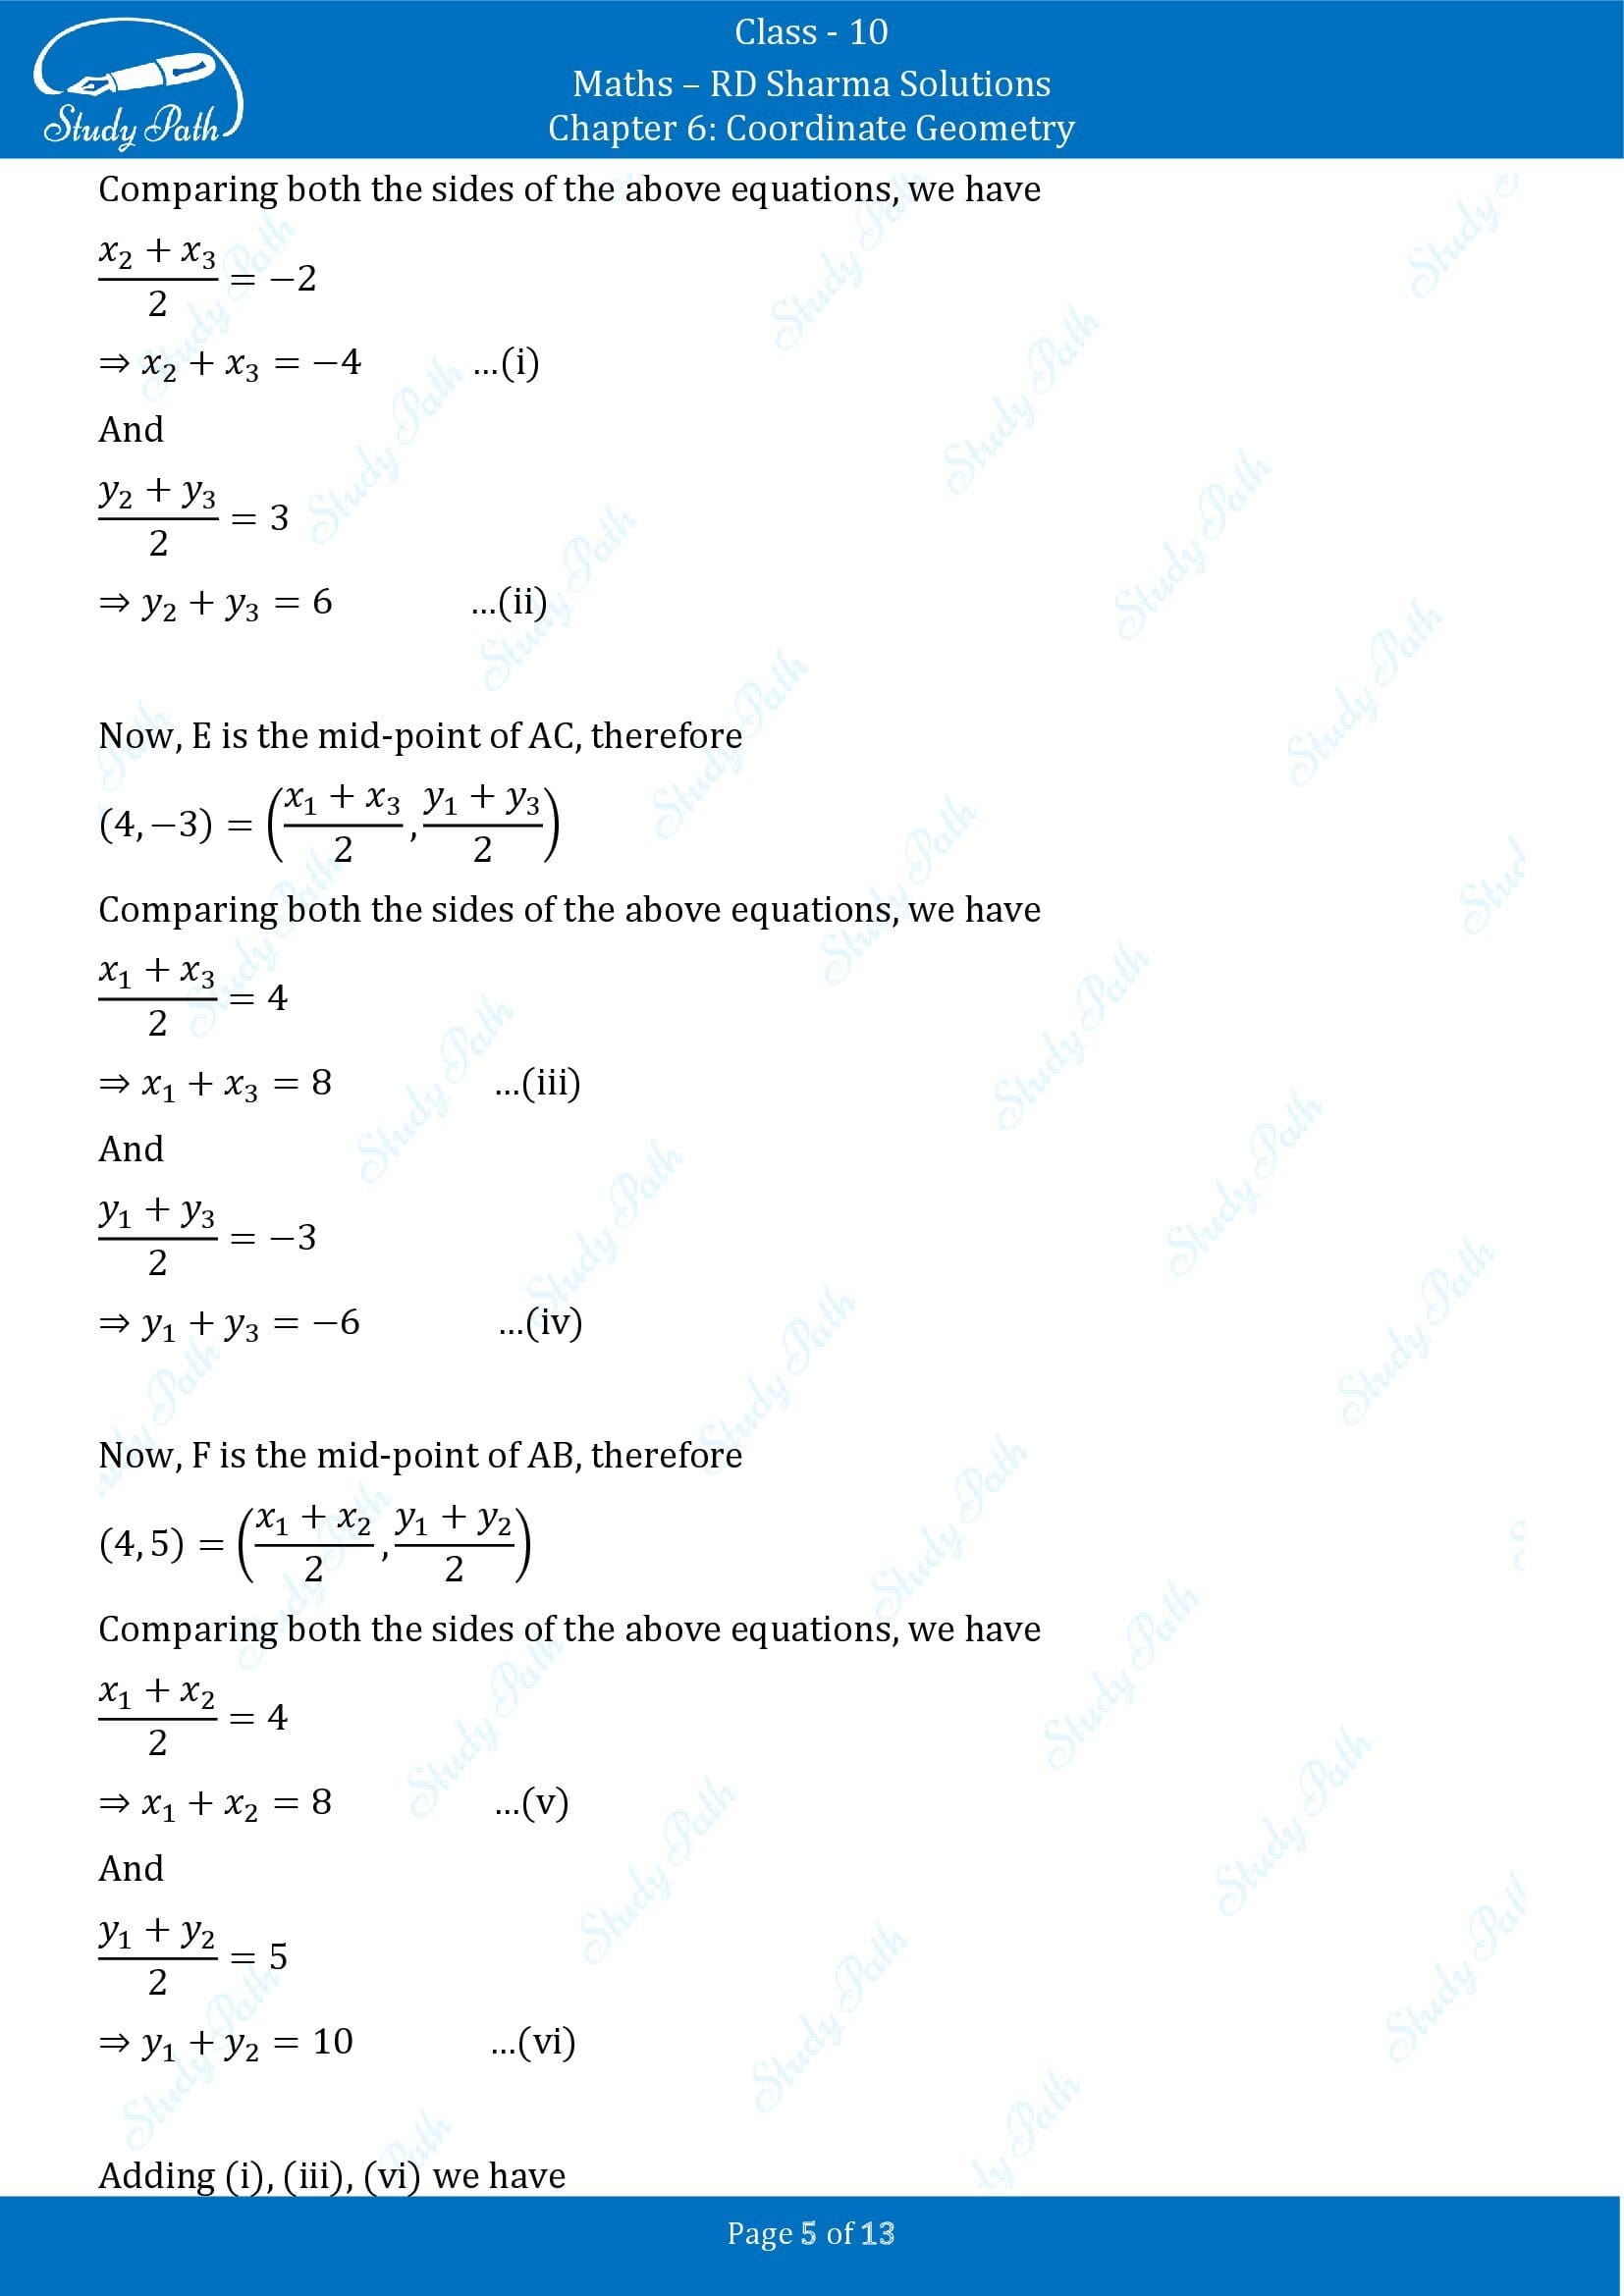 RD Sharma Solutions Class 10 Chapter 6 Coordinate Geometry Exercise 6.4 00005